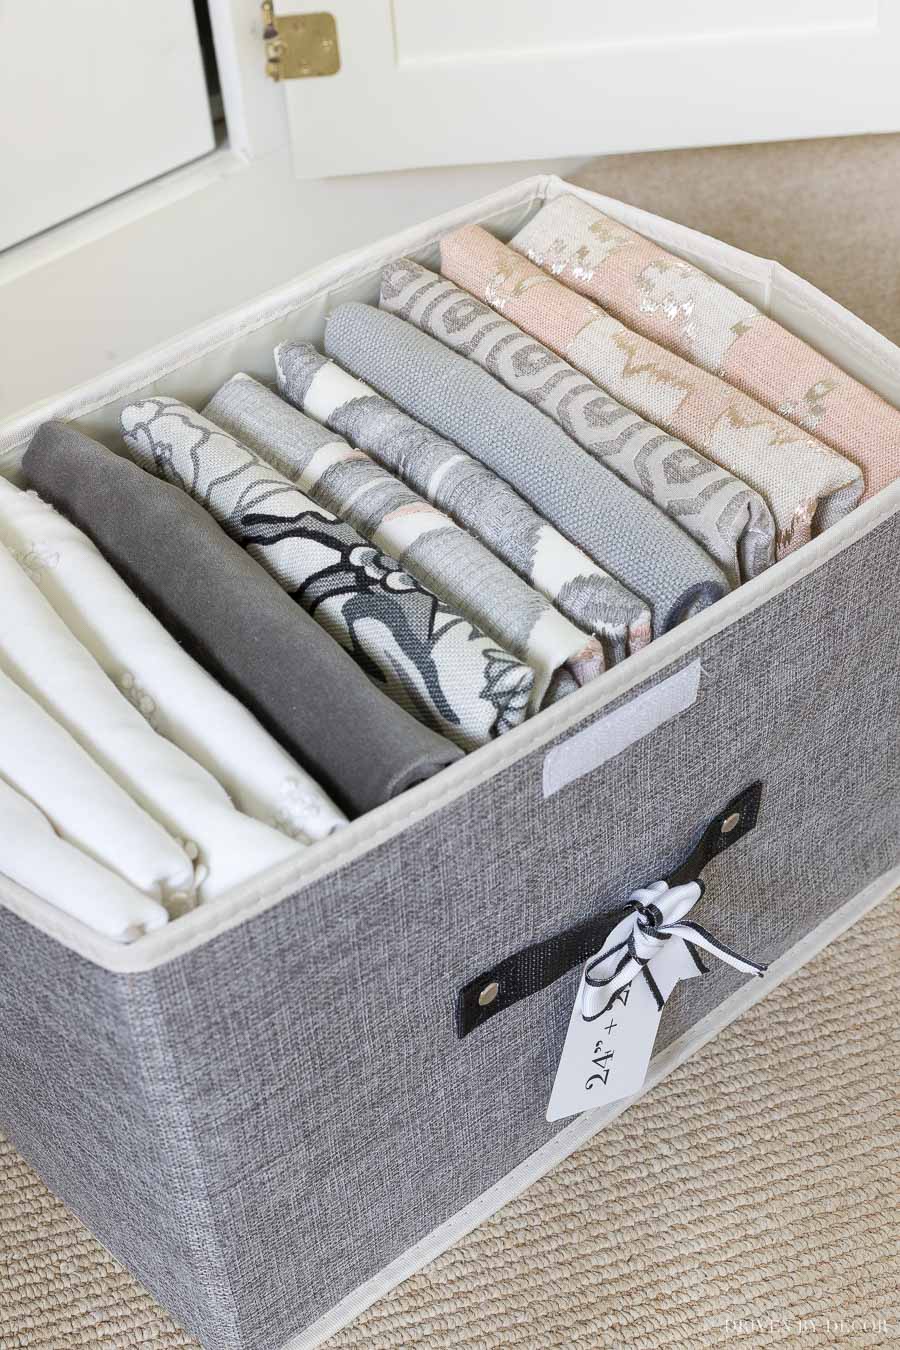 Pillow Storage: Organizing Tips! - Driven by Decor